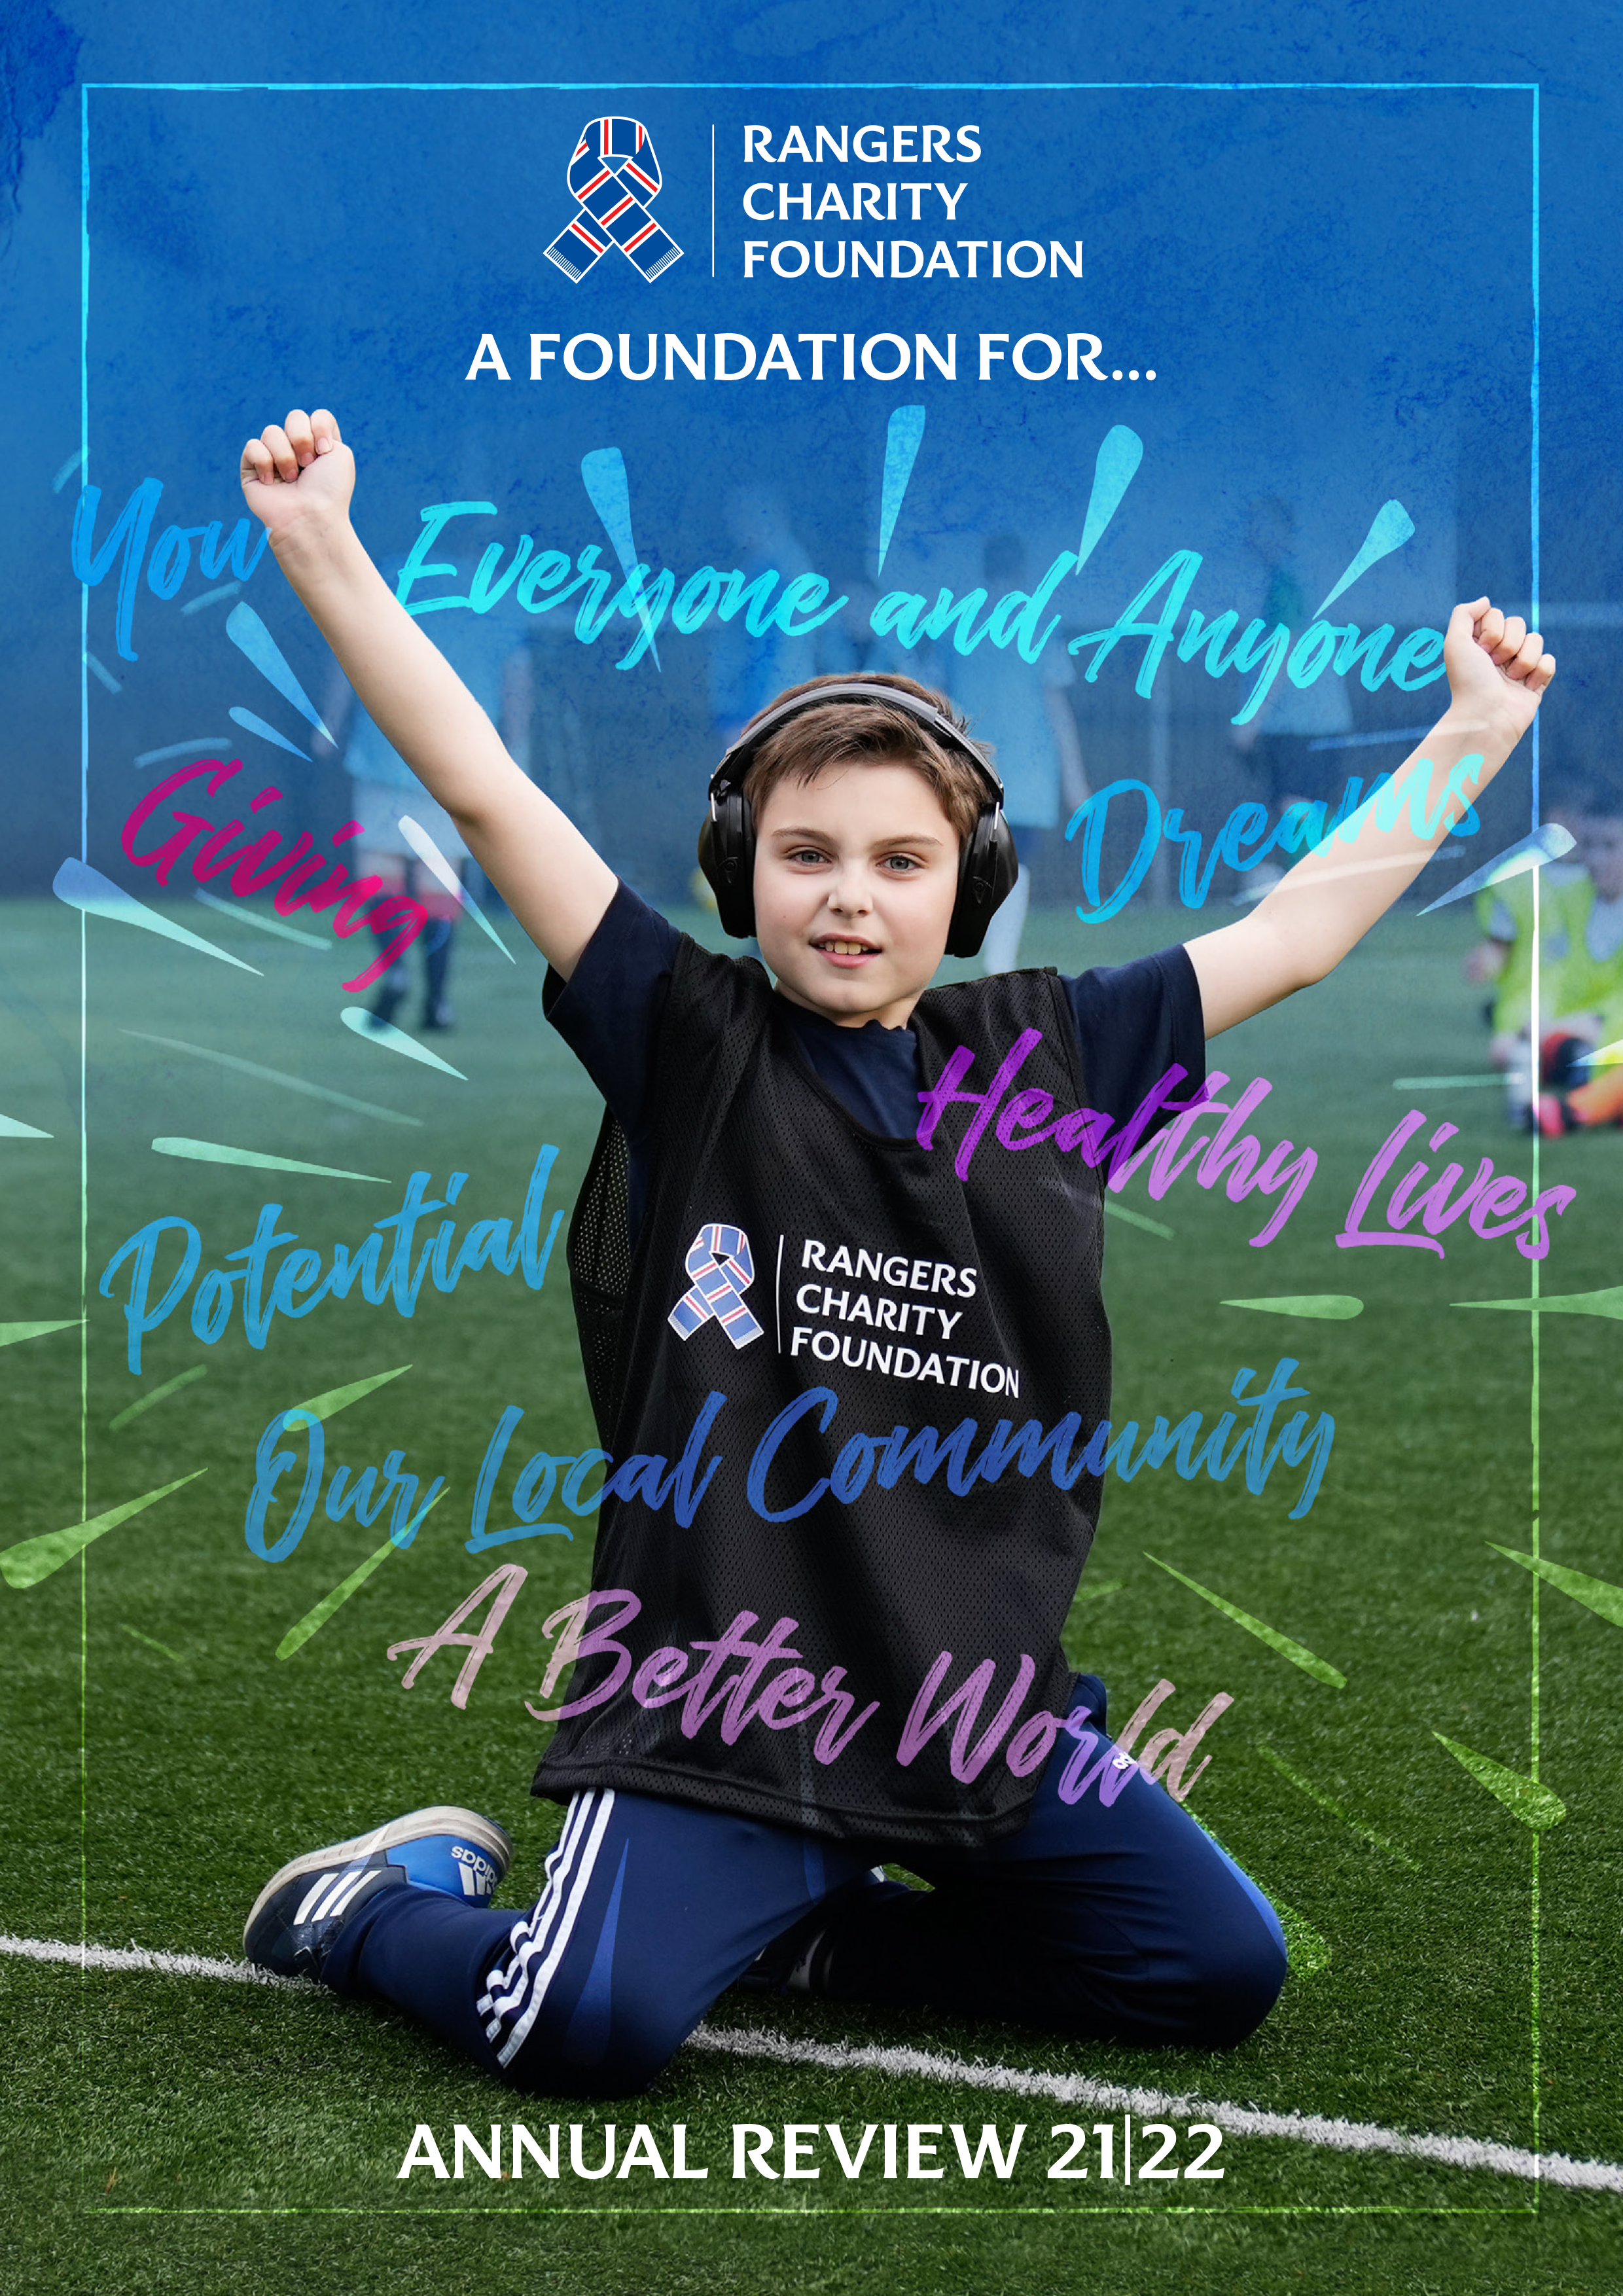 The cover of the 2021/22 Annual review featuring a child celebrating